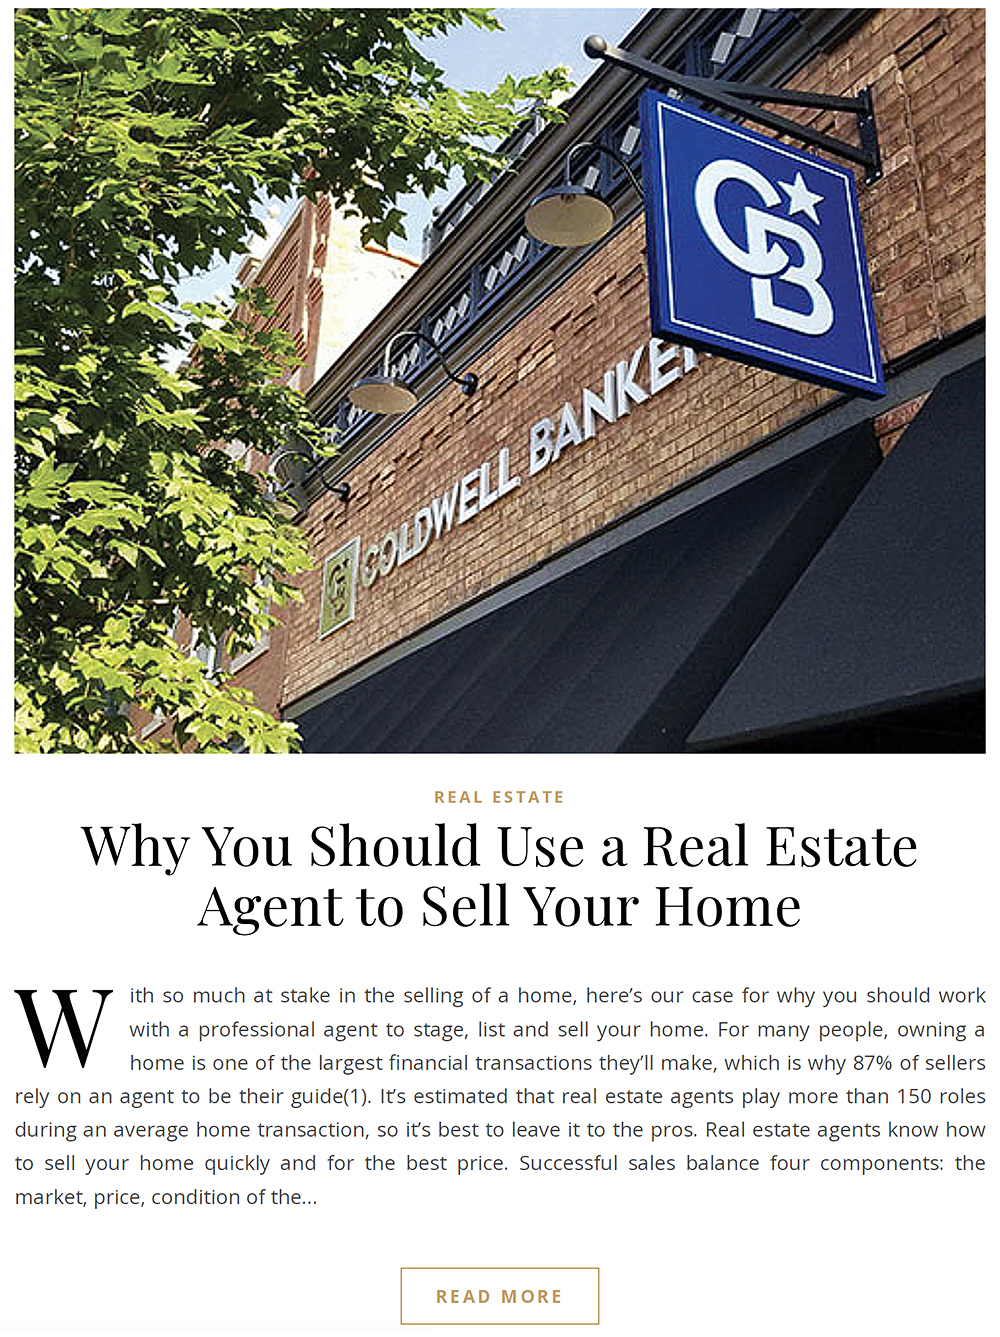 Why you should use a Real Estate Agent